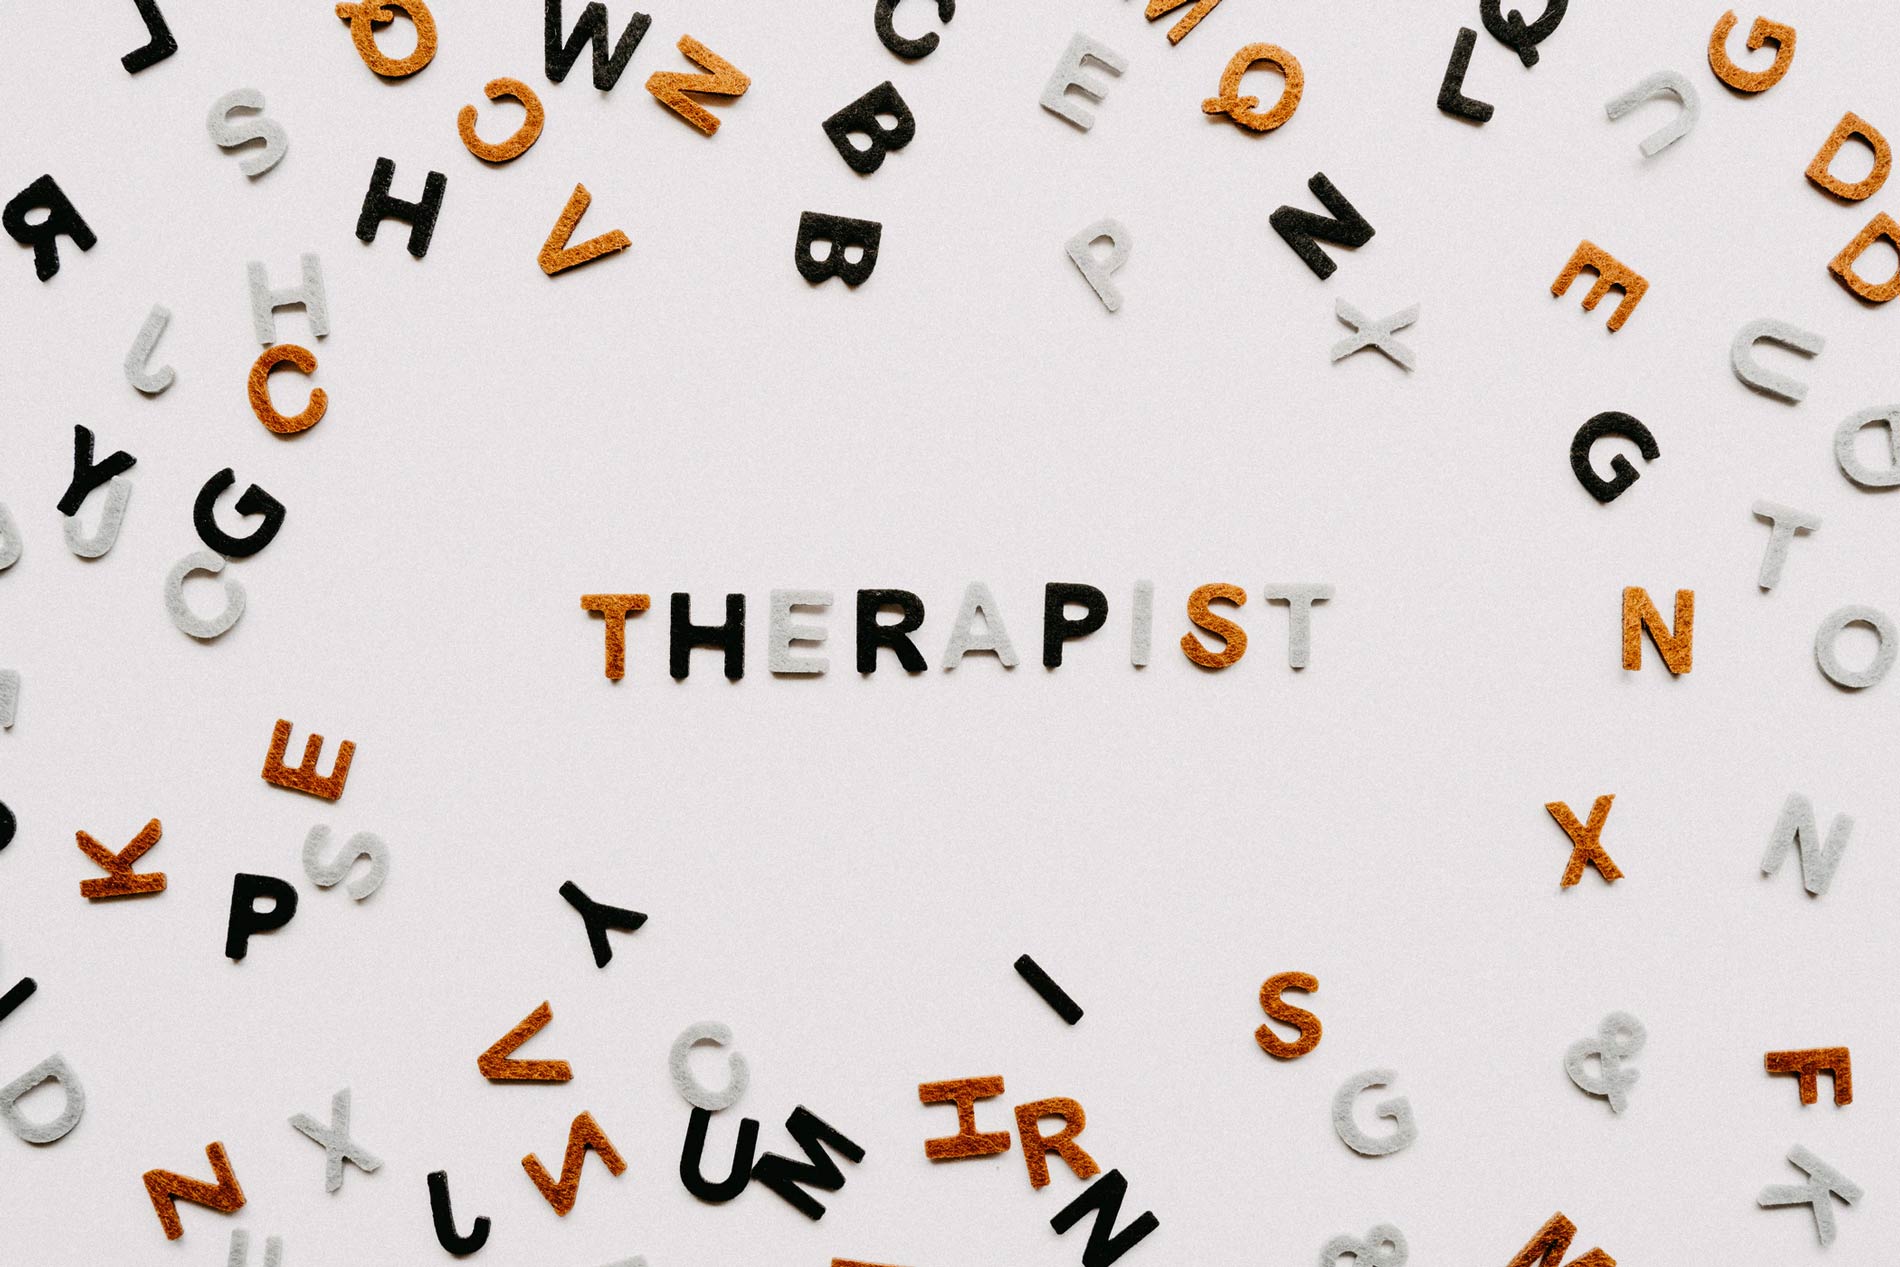 How do I choose a good therapist?